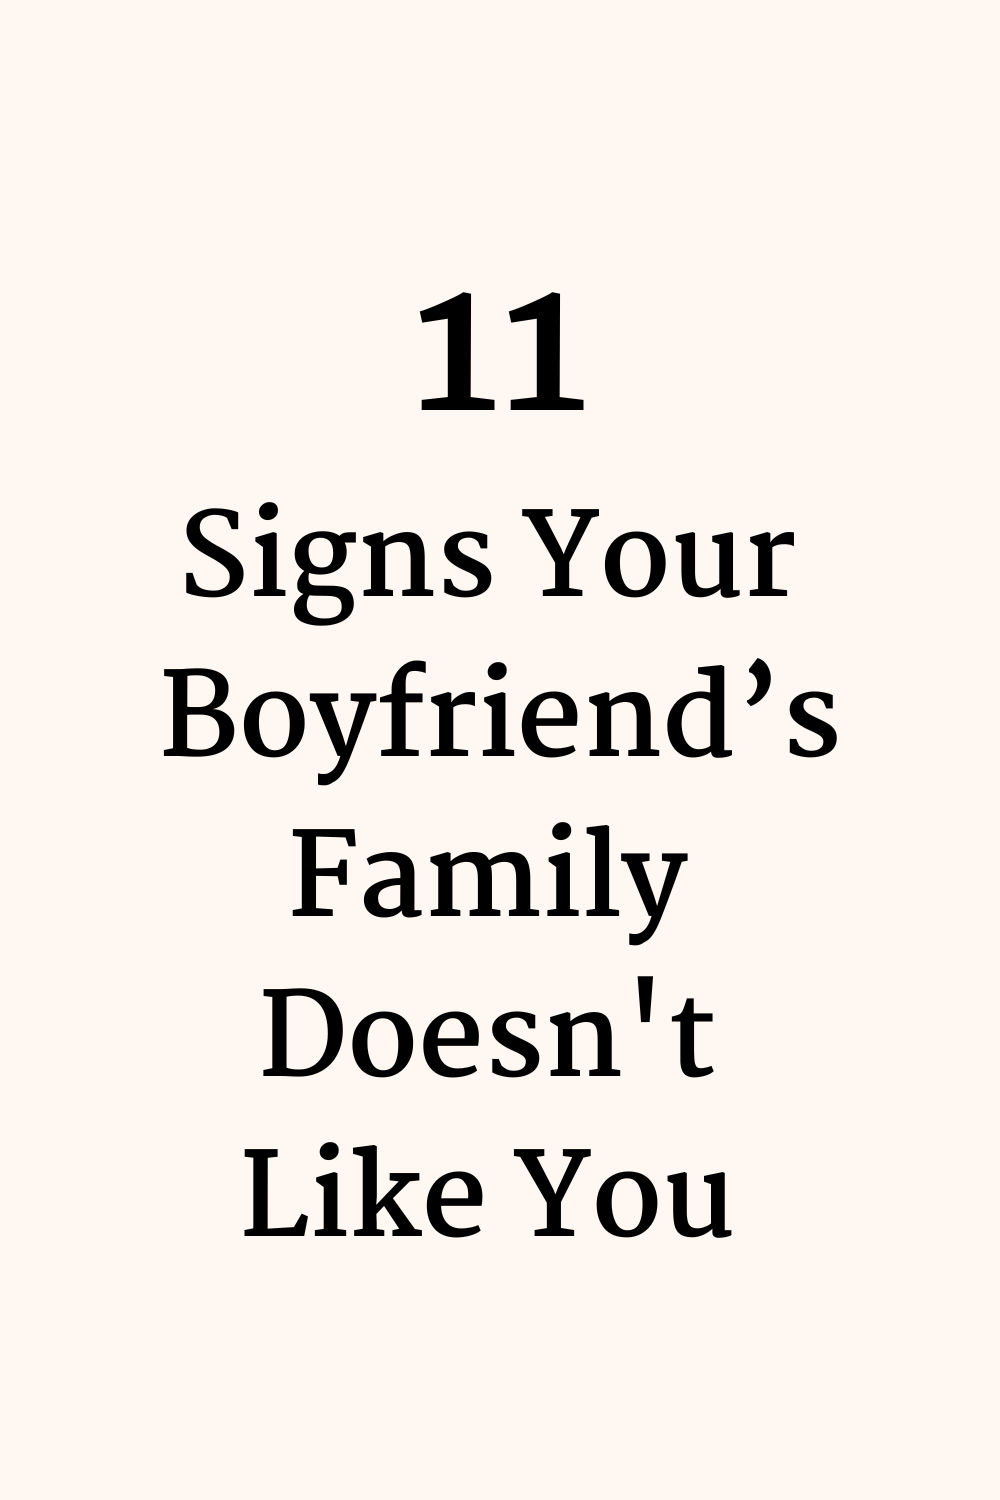 Signs Your Boyfriend's Family Doesn't Like You